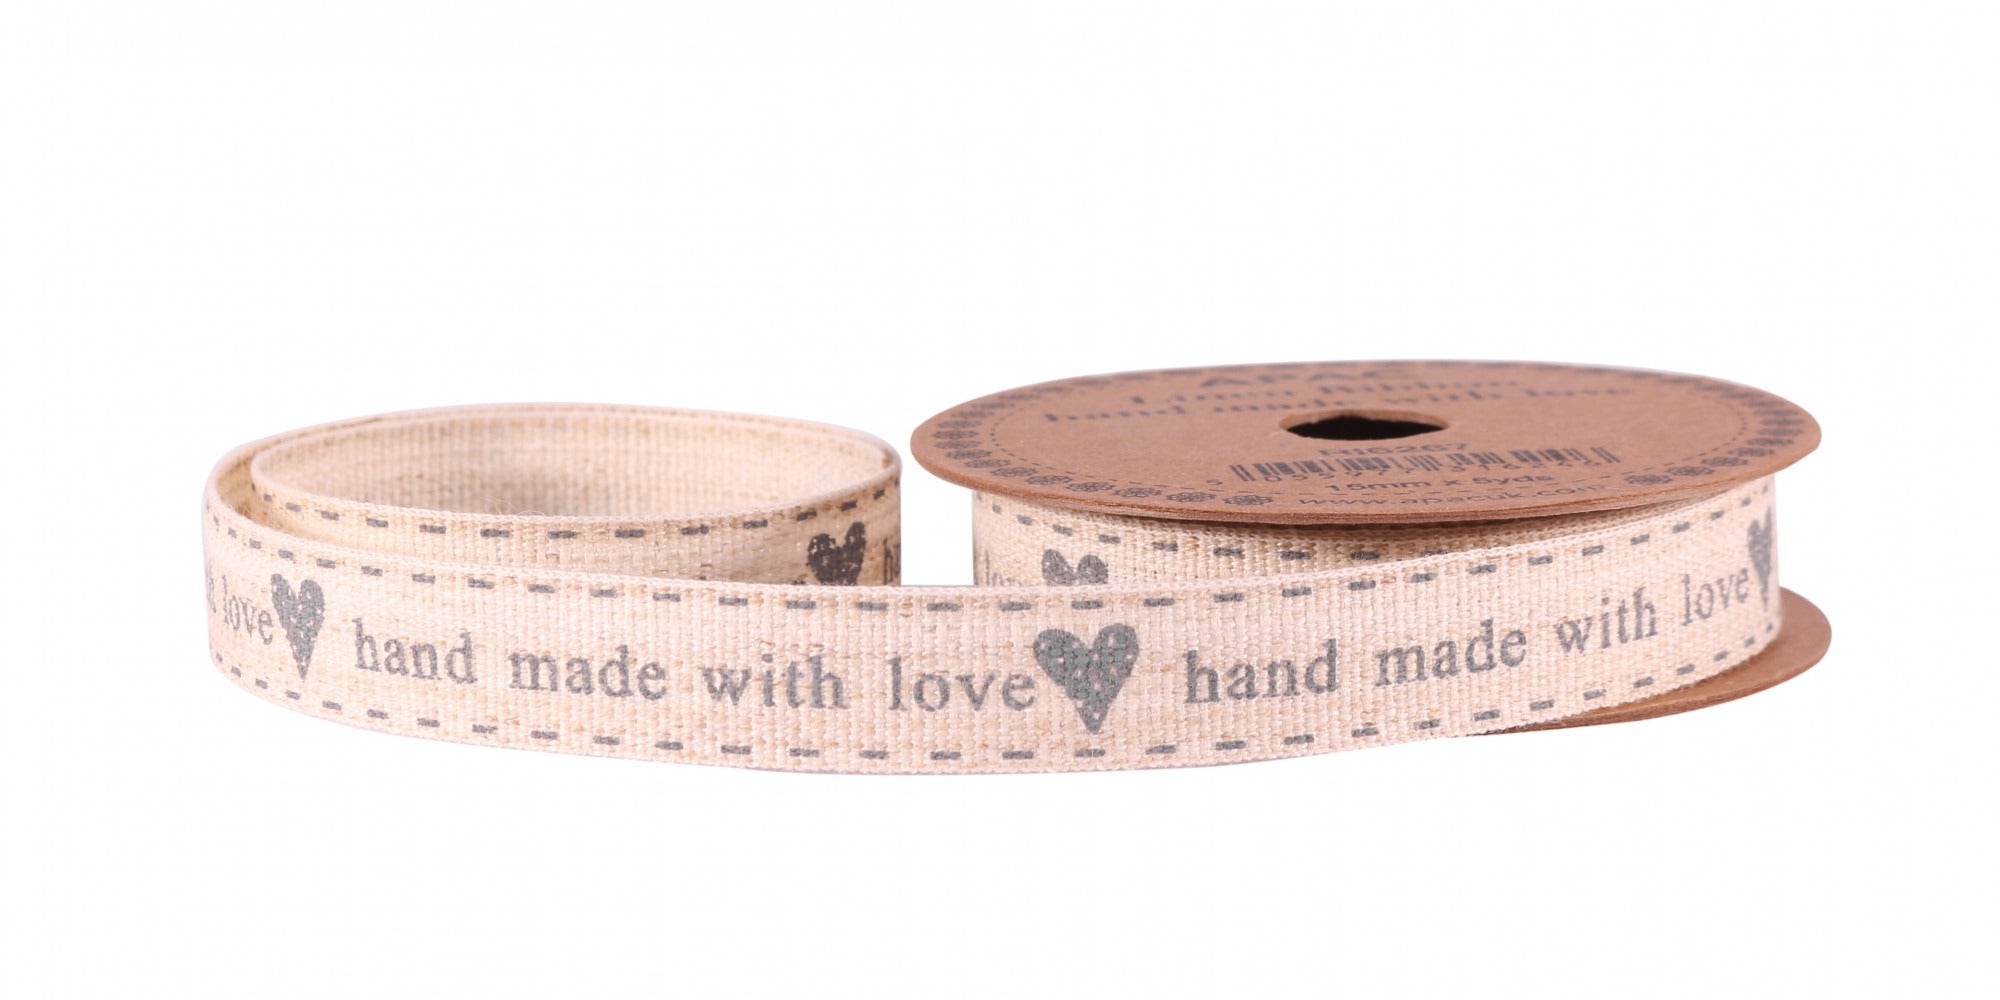 View Handmade with Love Grey Linen Ribbon 15mm information